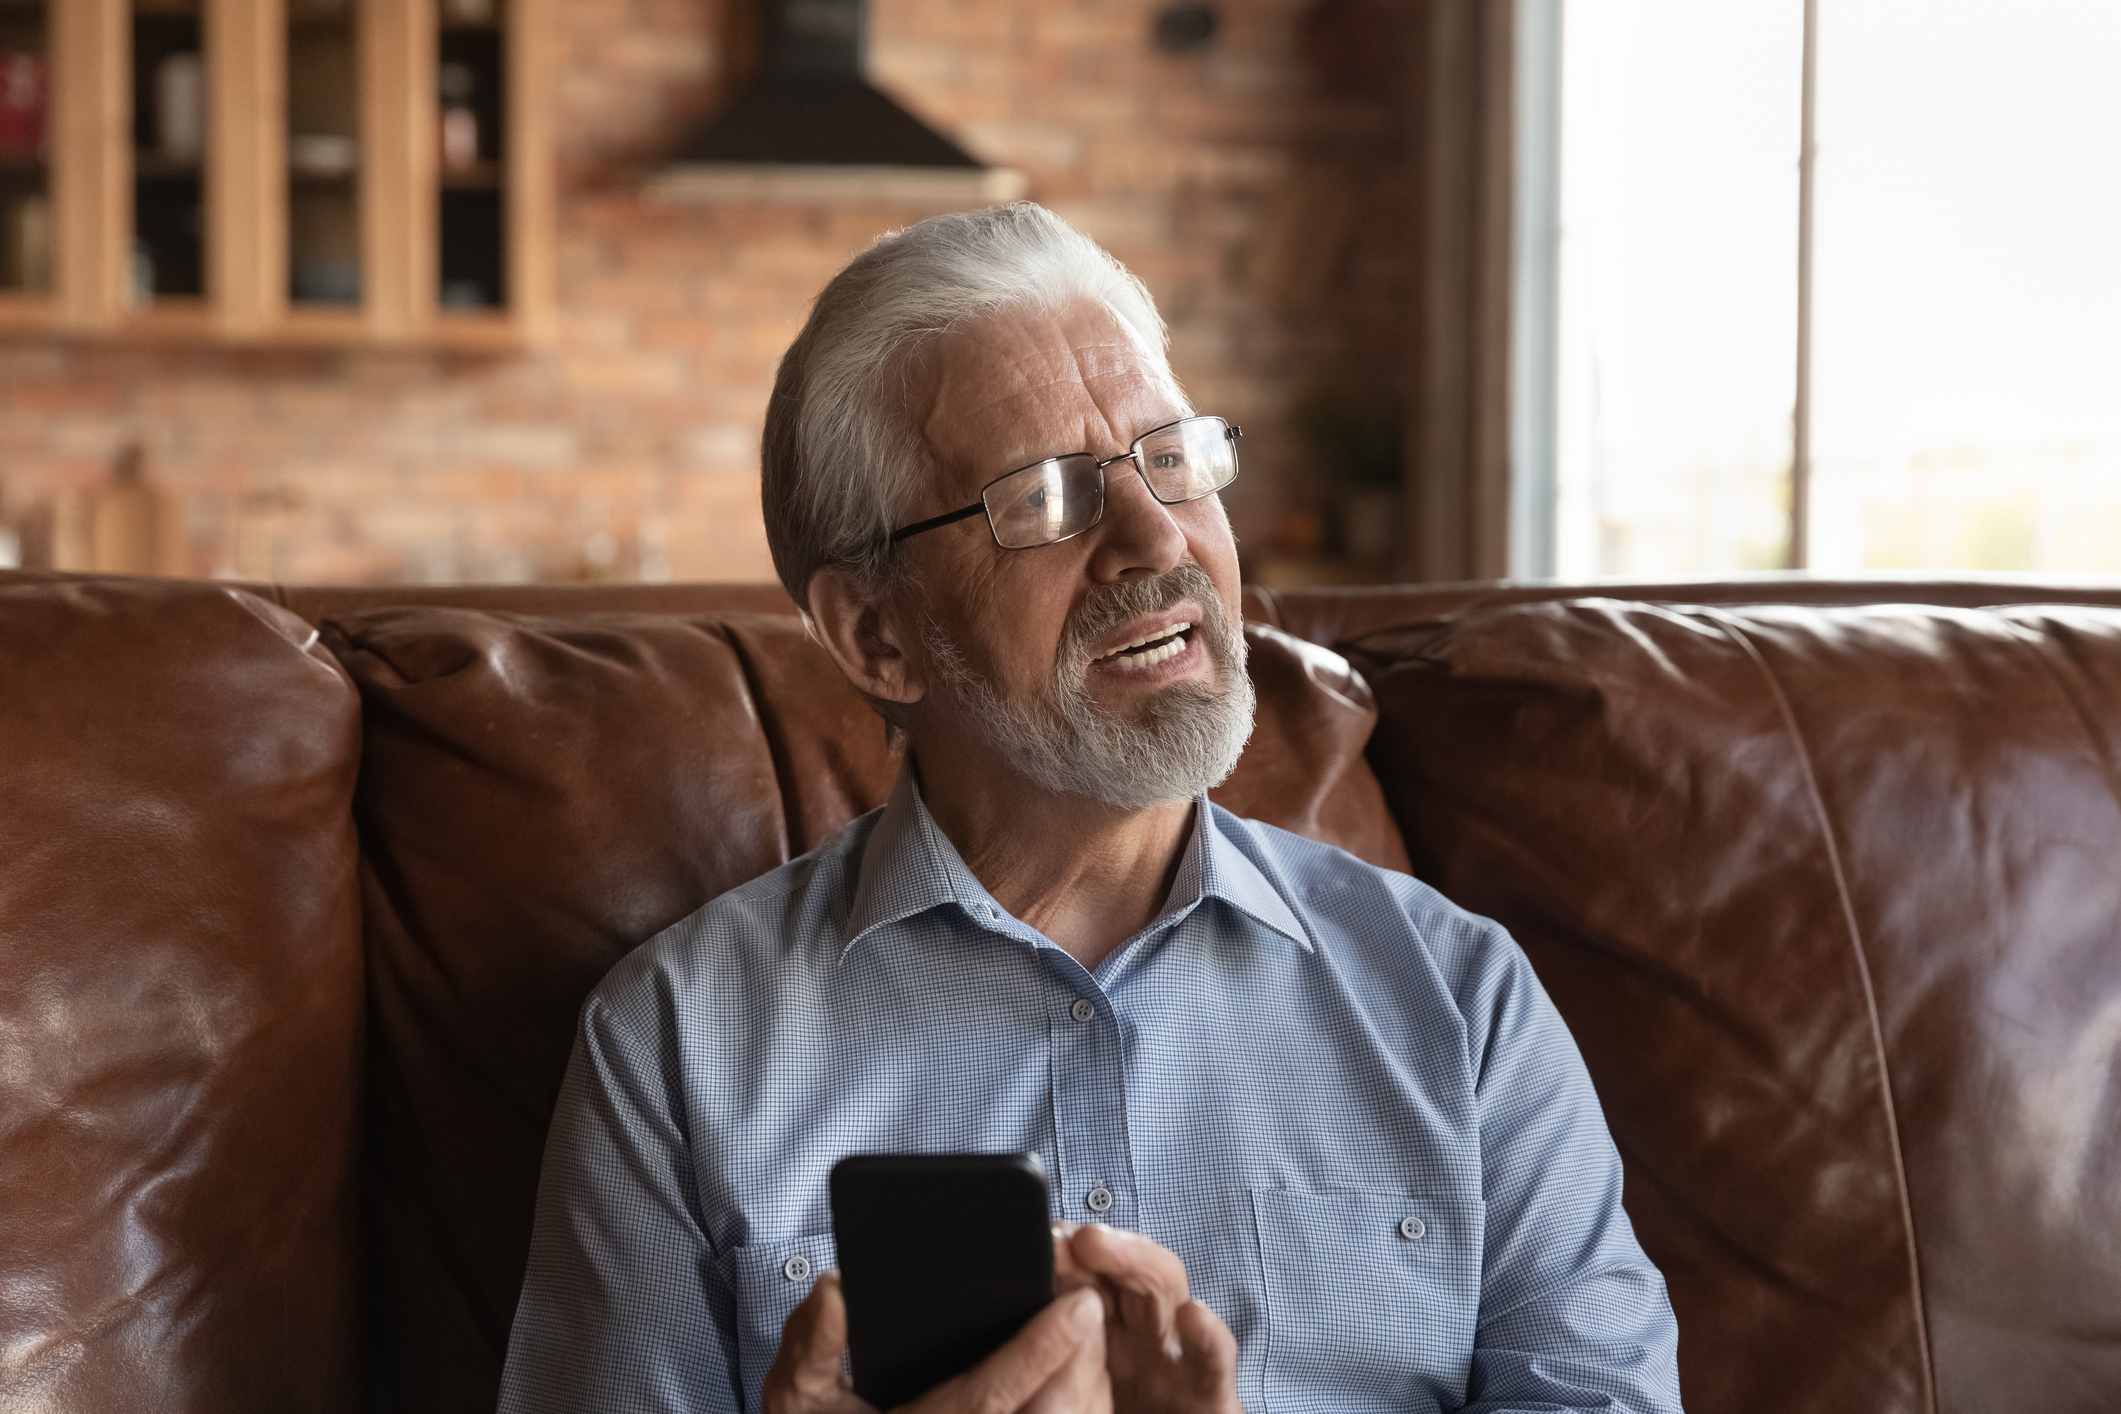 Senior man sitting on a couch looking at a smartphone, displaying a moment of learning or managing technology